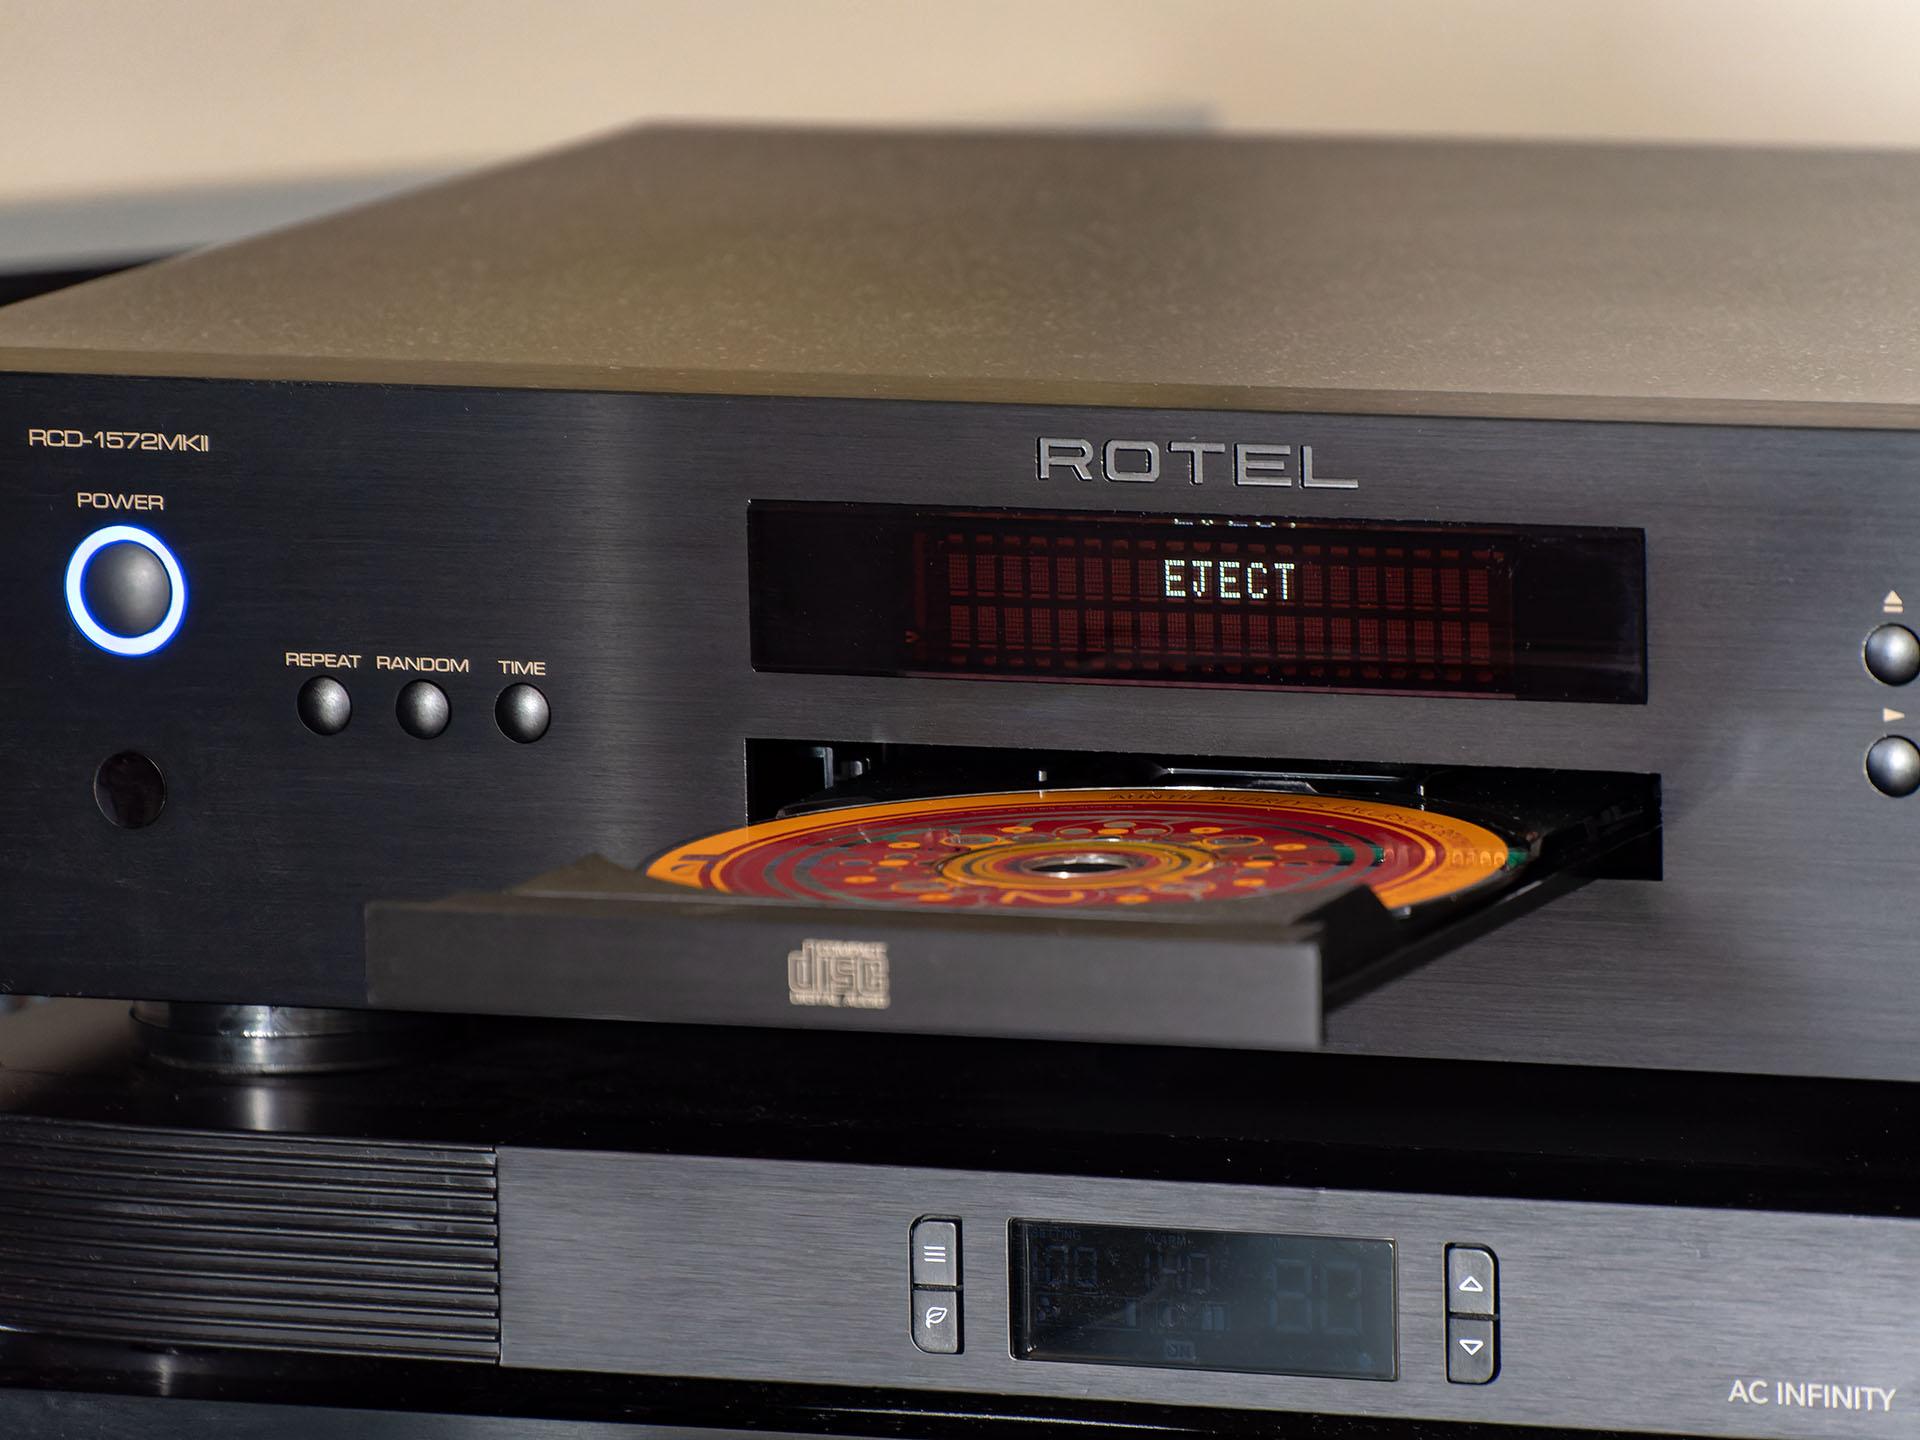 I was not prepared for how much I enjoyed having a world-class CD player on hand. ad45c23d rotel loading cd web